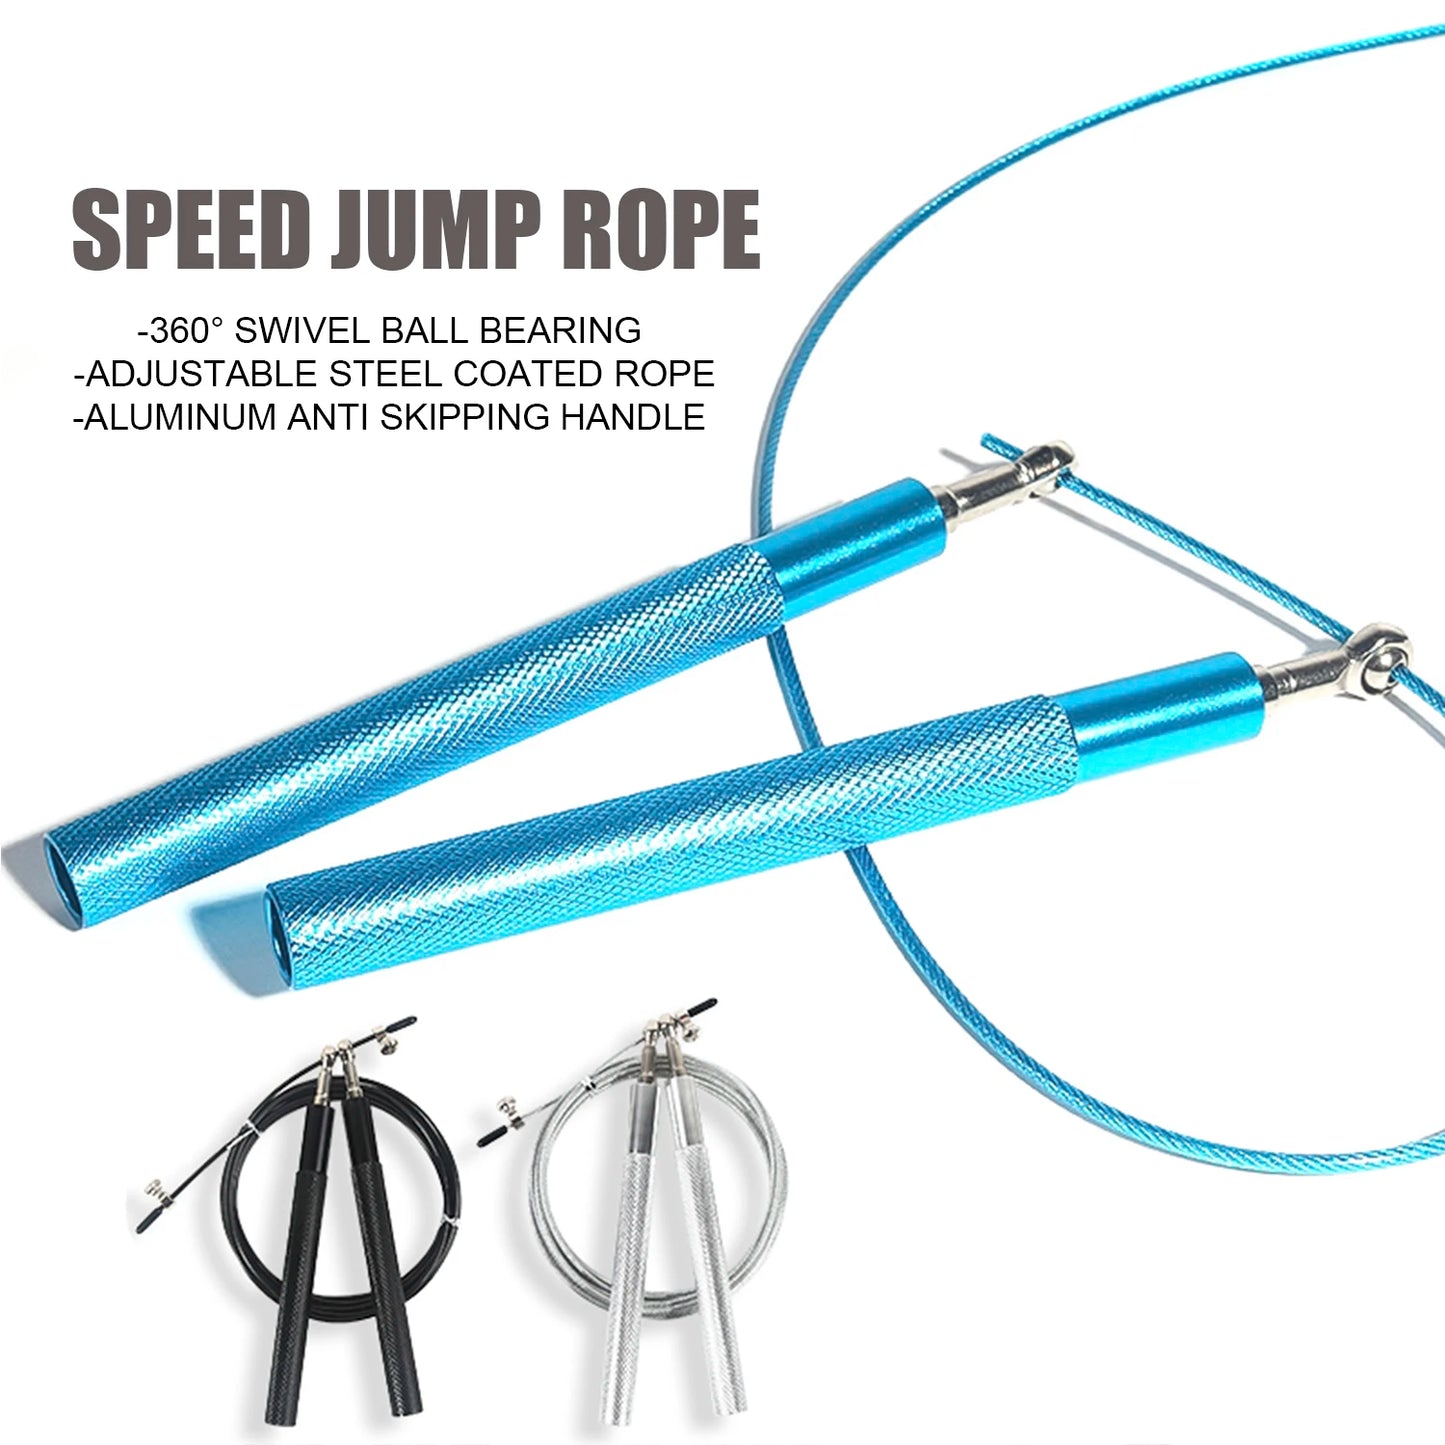 Speed Jump Rope 360° Swivel Ball Bearing Adjustable Steel Coated Rope Workout Fitness Training Boxing Exercises Skipping Ropes